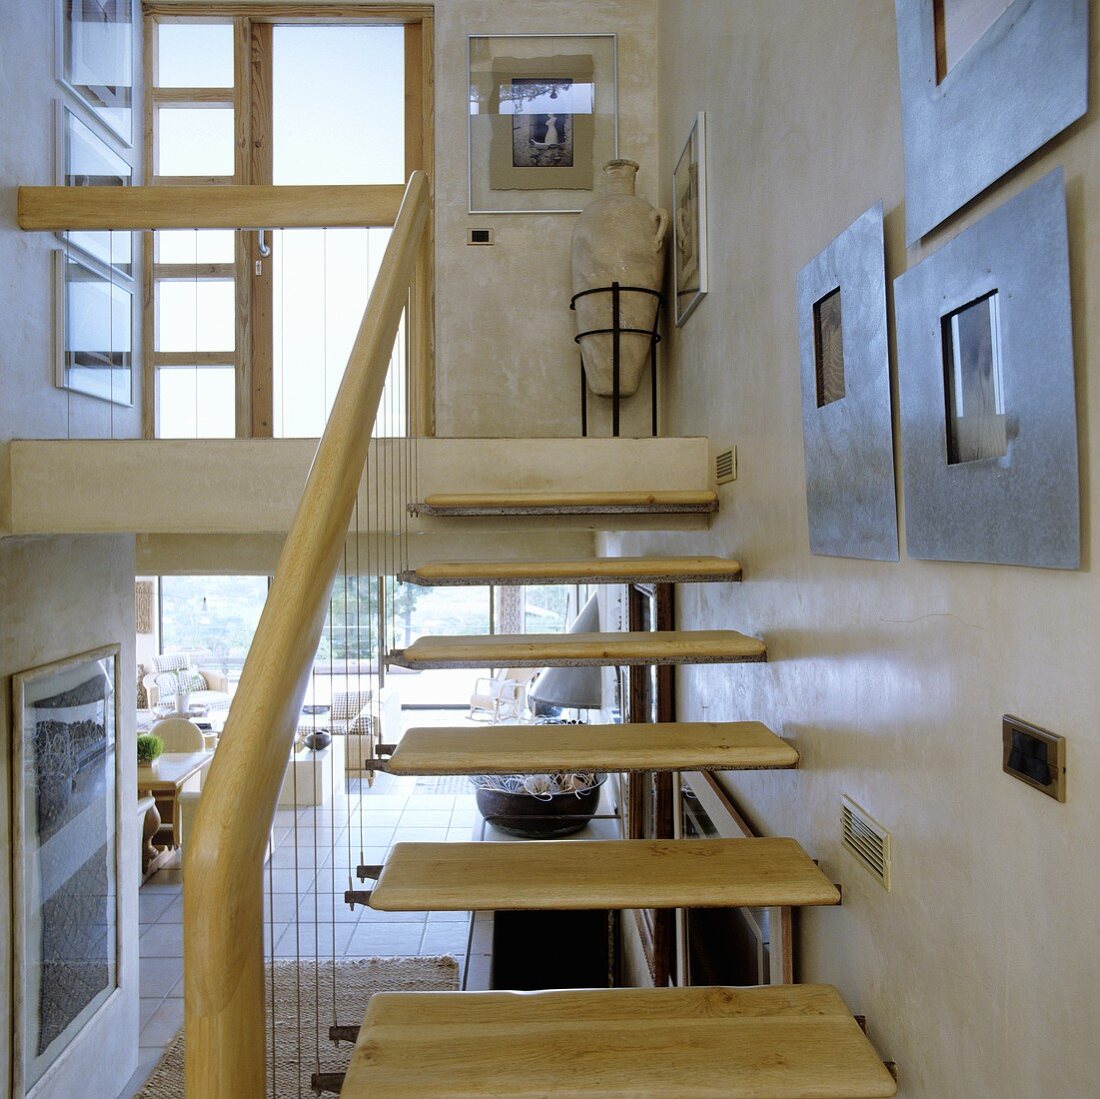 A flight of stairs in a maisonette apartment